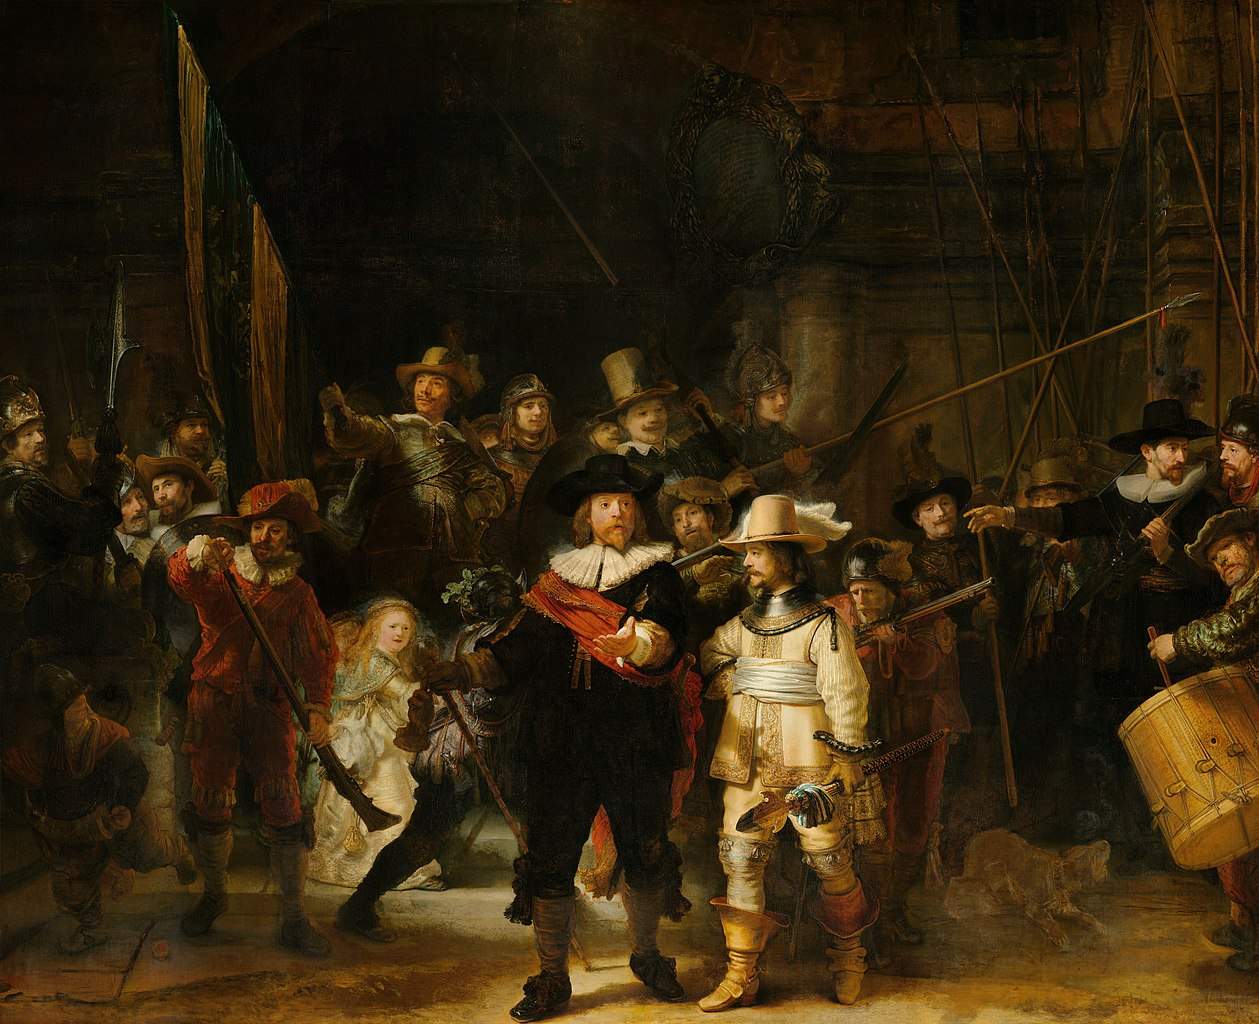 Rembrandt's Night Watch as you've never seen it: most detailed photo ever online